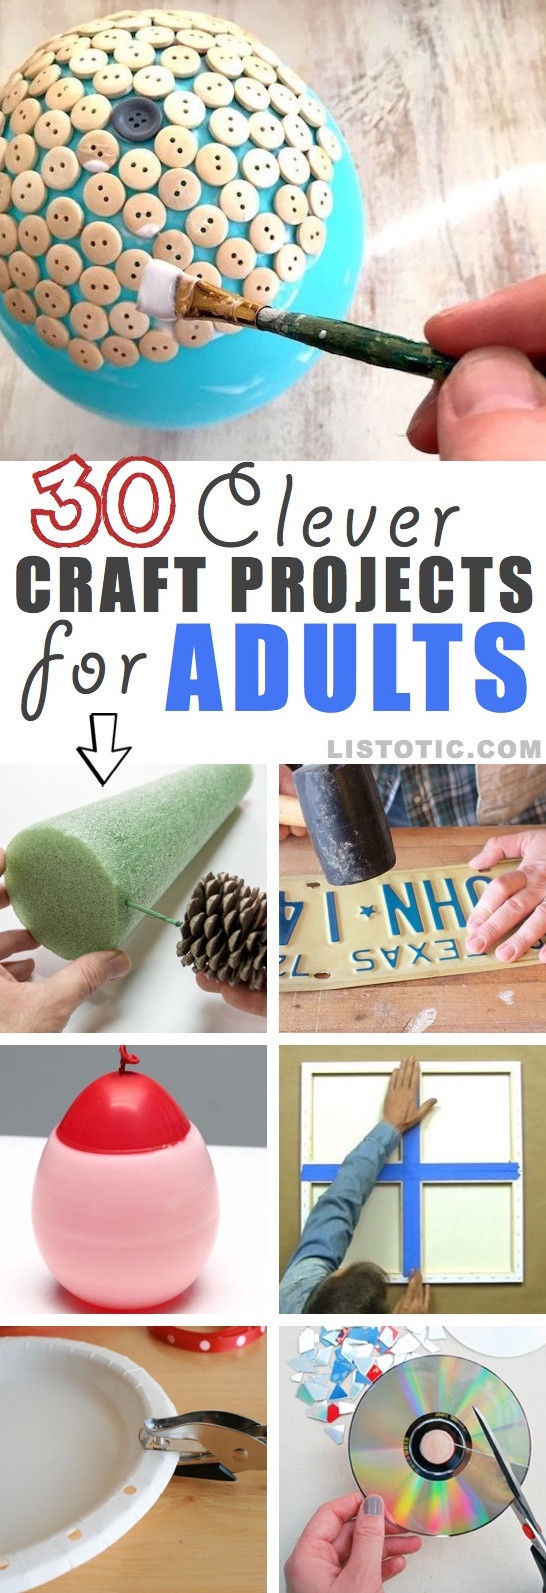 Creative Activities For Adults
 10 Creative Craft Ideas For Adults Abundator